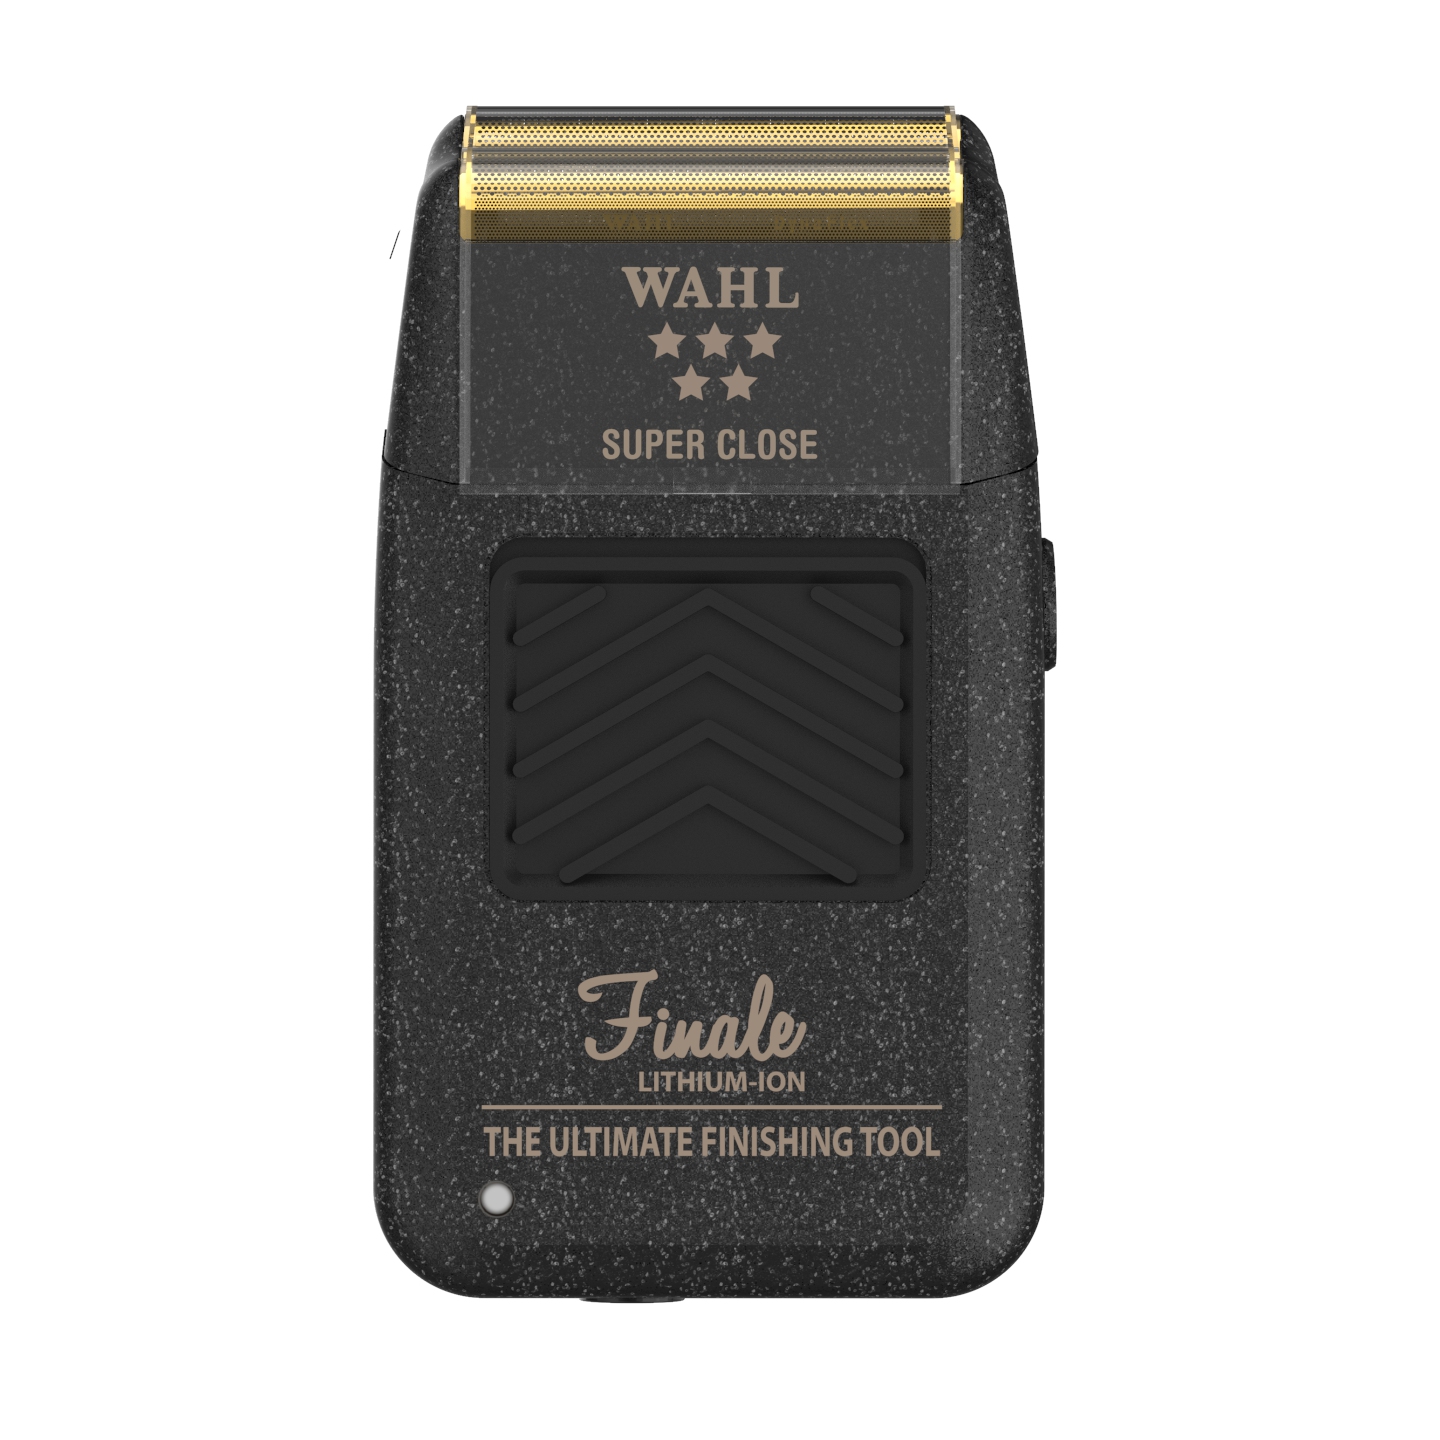 wahl finale finishing tool